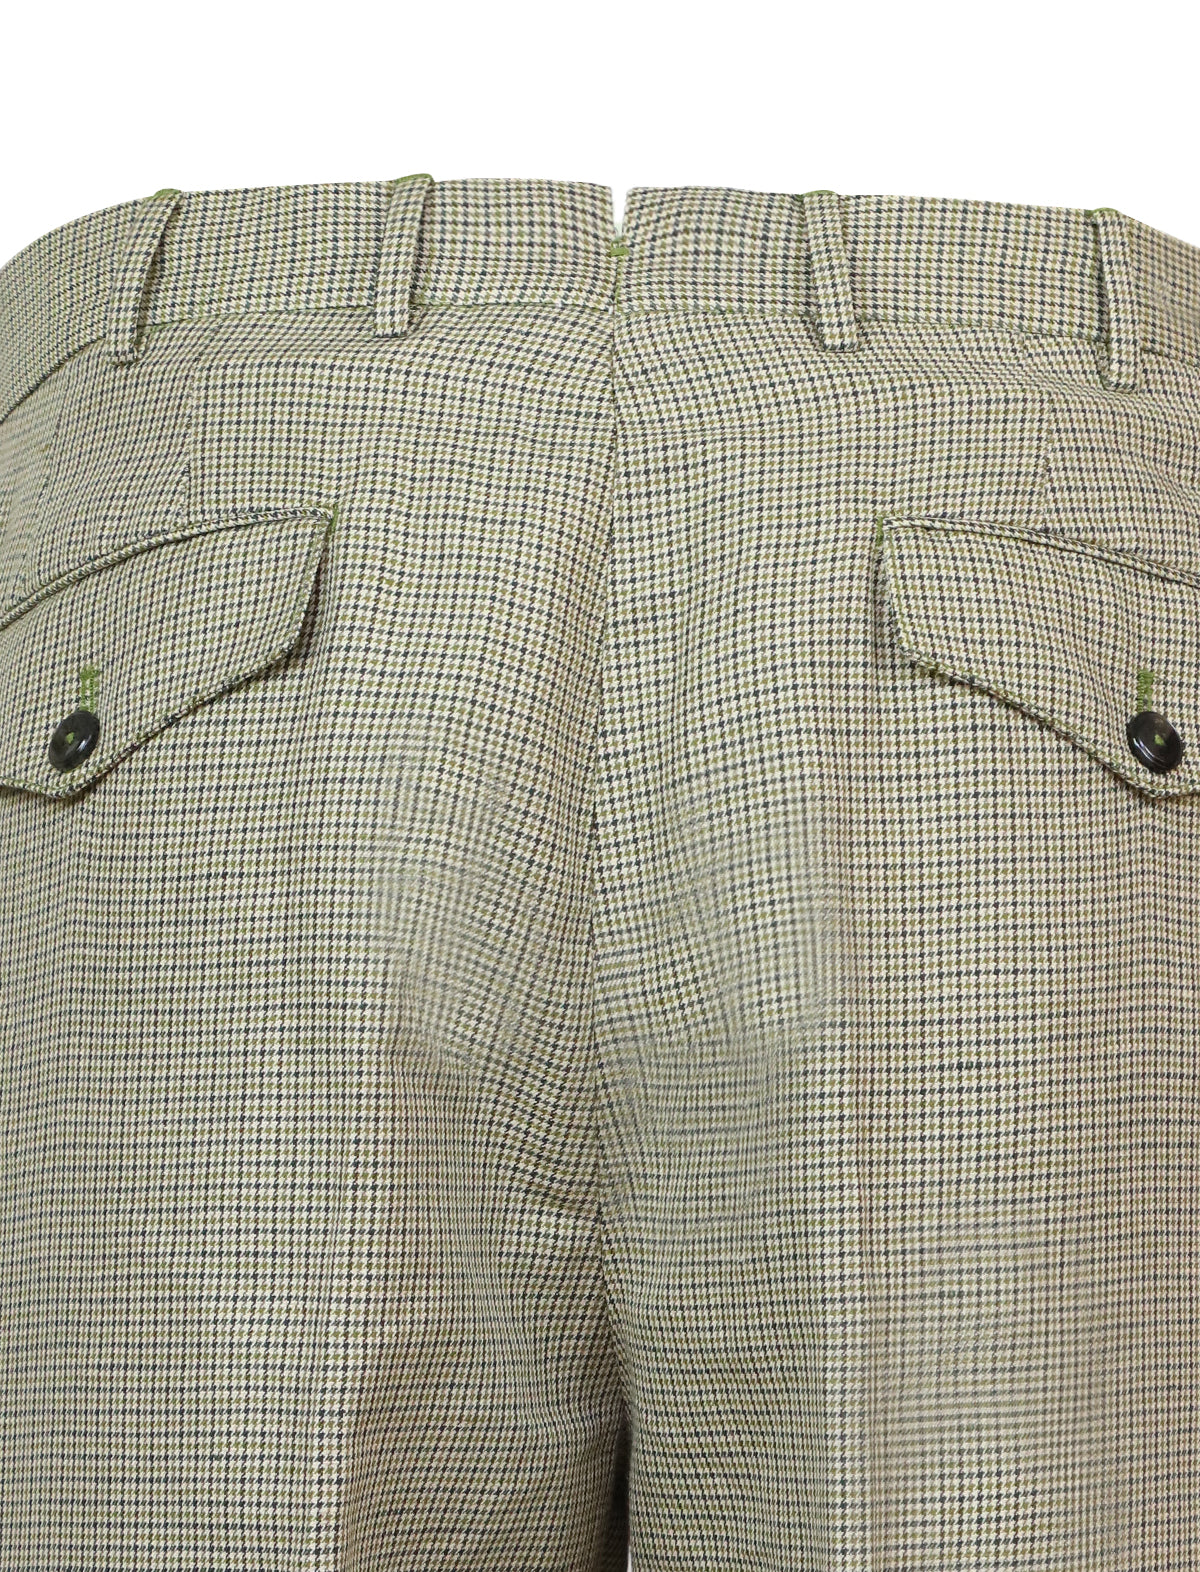 PT Torino Linen-Cotton Pants in Yellow Houndstooth